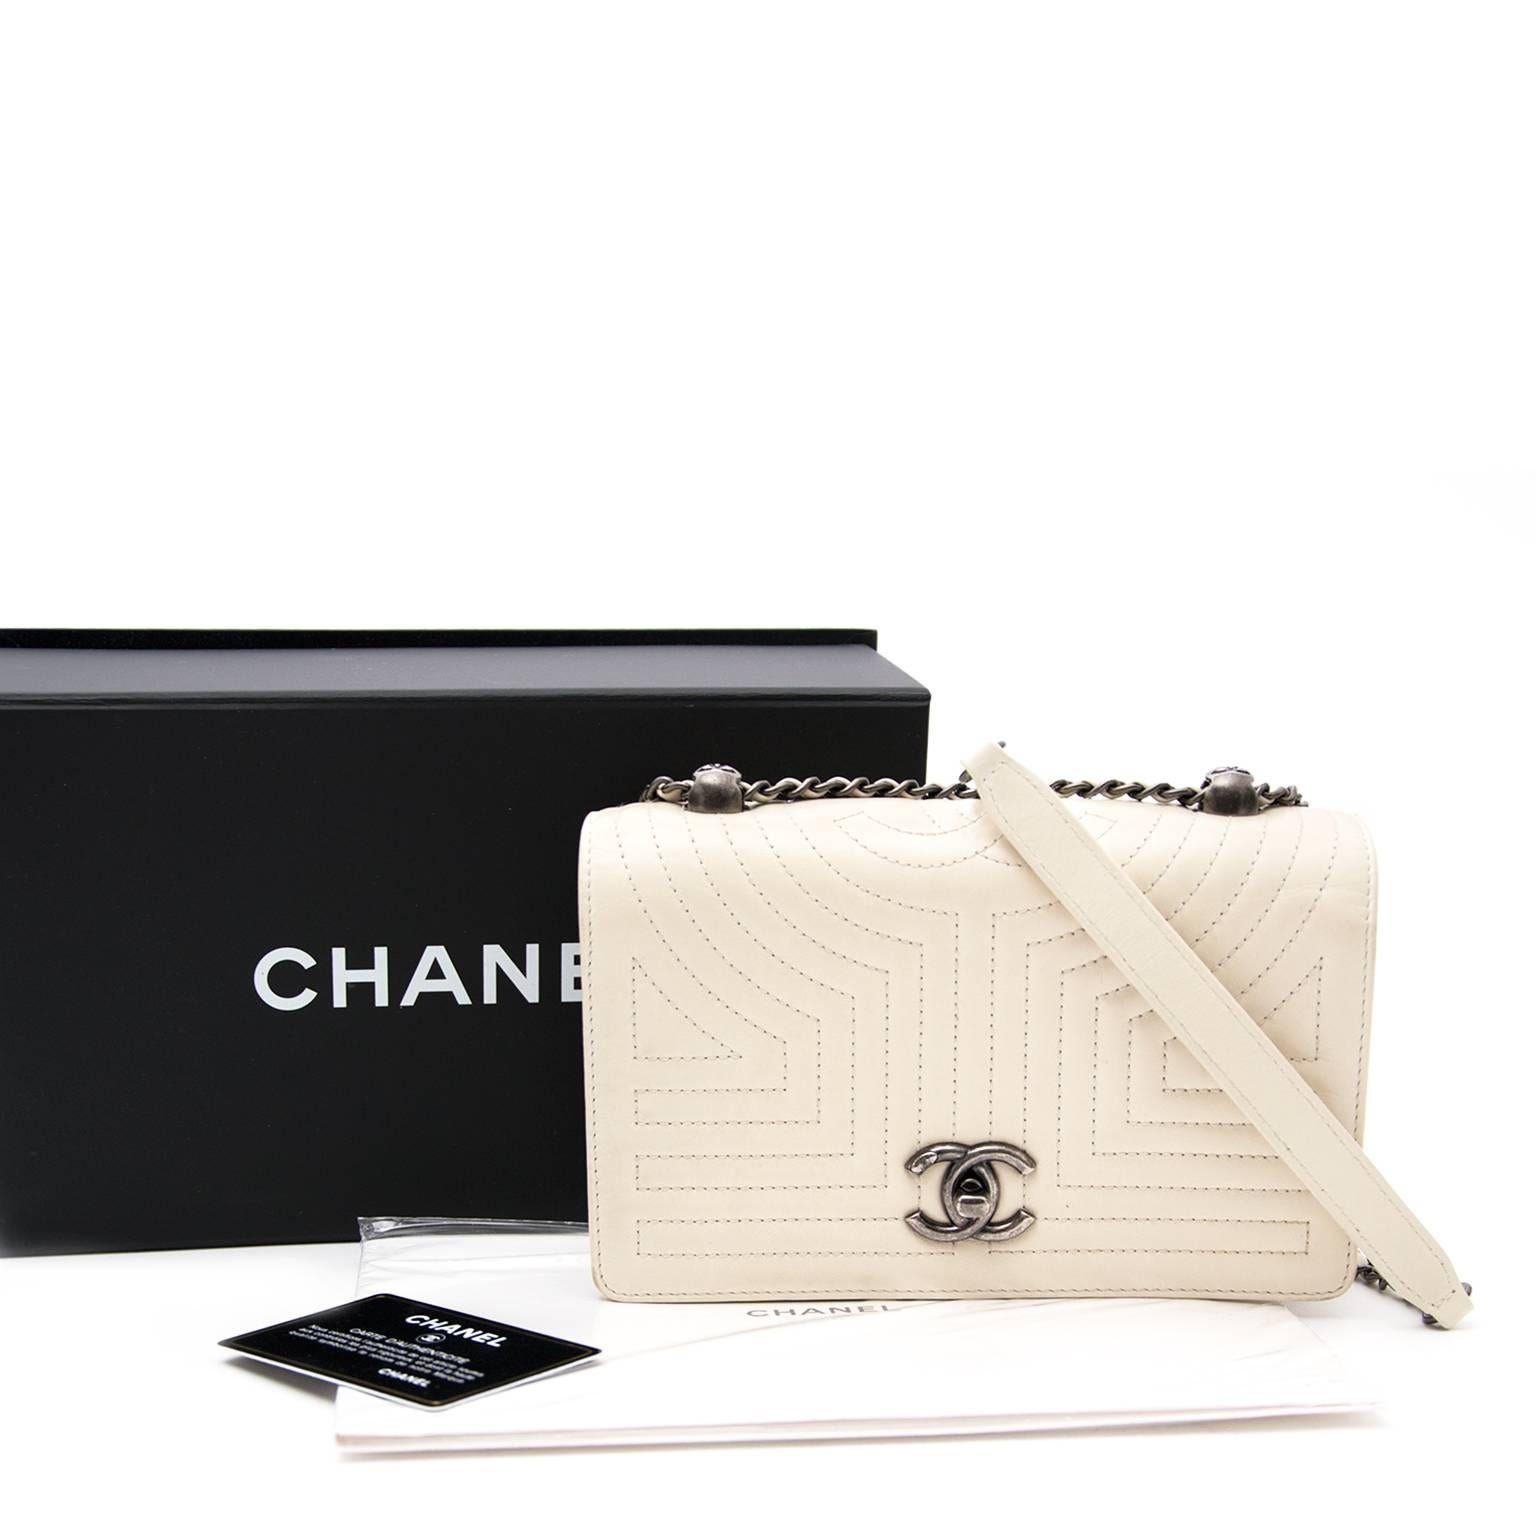 Very Good Condition

Chanel White Flap Bag

The iconic Chanel Flap Bag is the IT-bag every fashion lover dreams of. This fabulous small version of the world's most covetable handbag comes in a creamy white leather, which makes this bag easy to